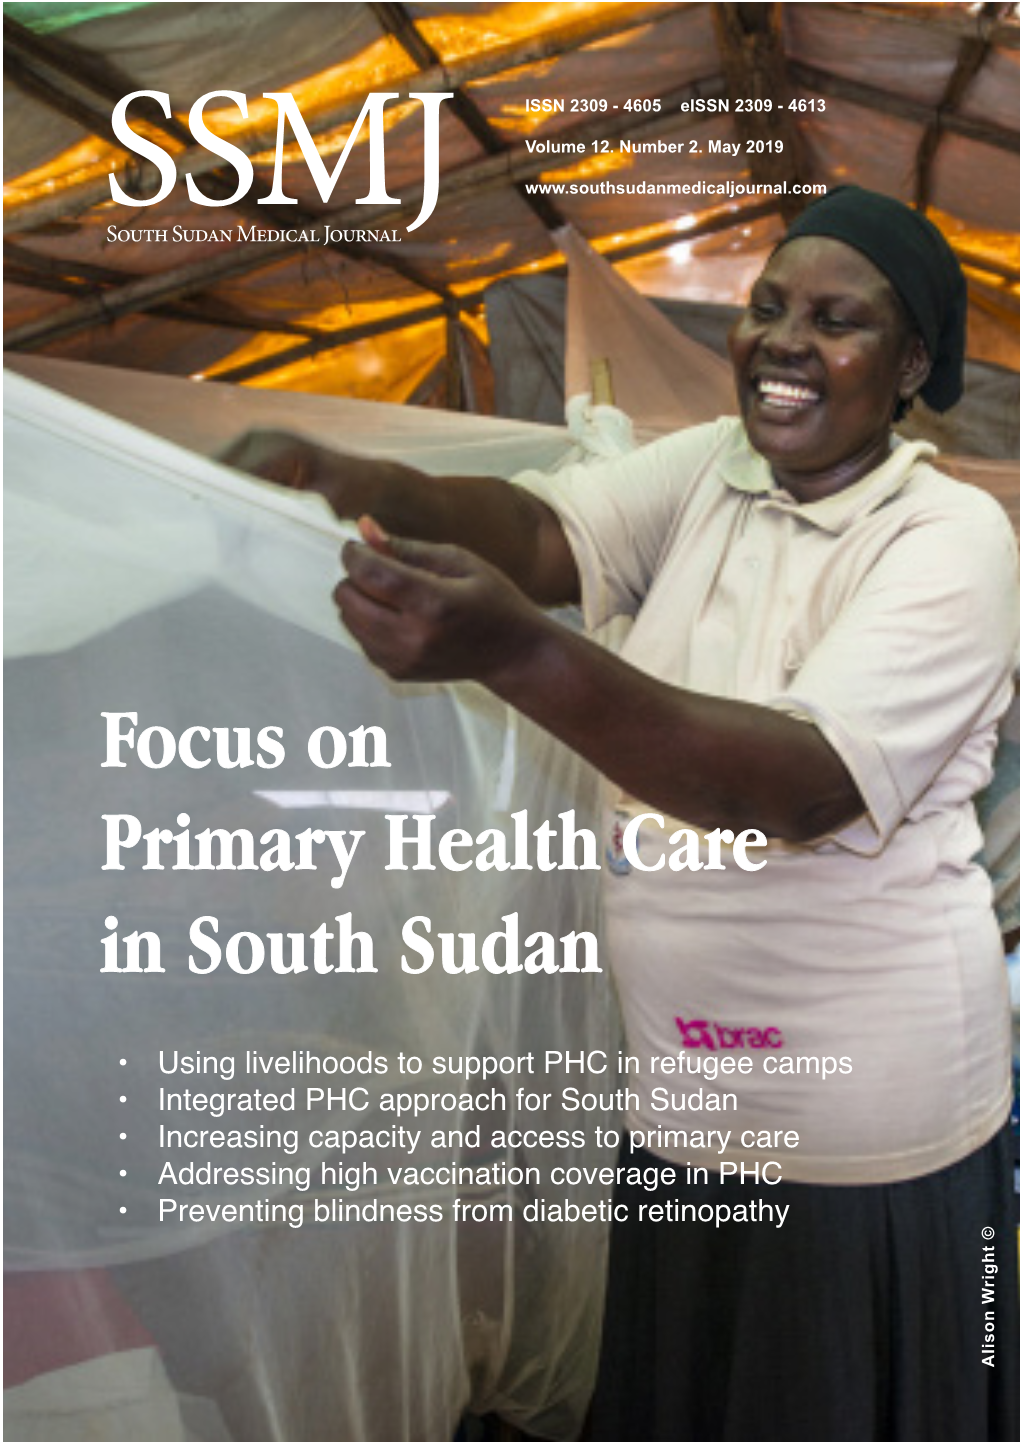 Focus on Primary Health Care in South Sudan